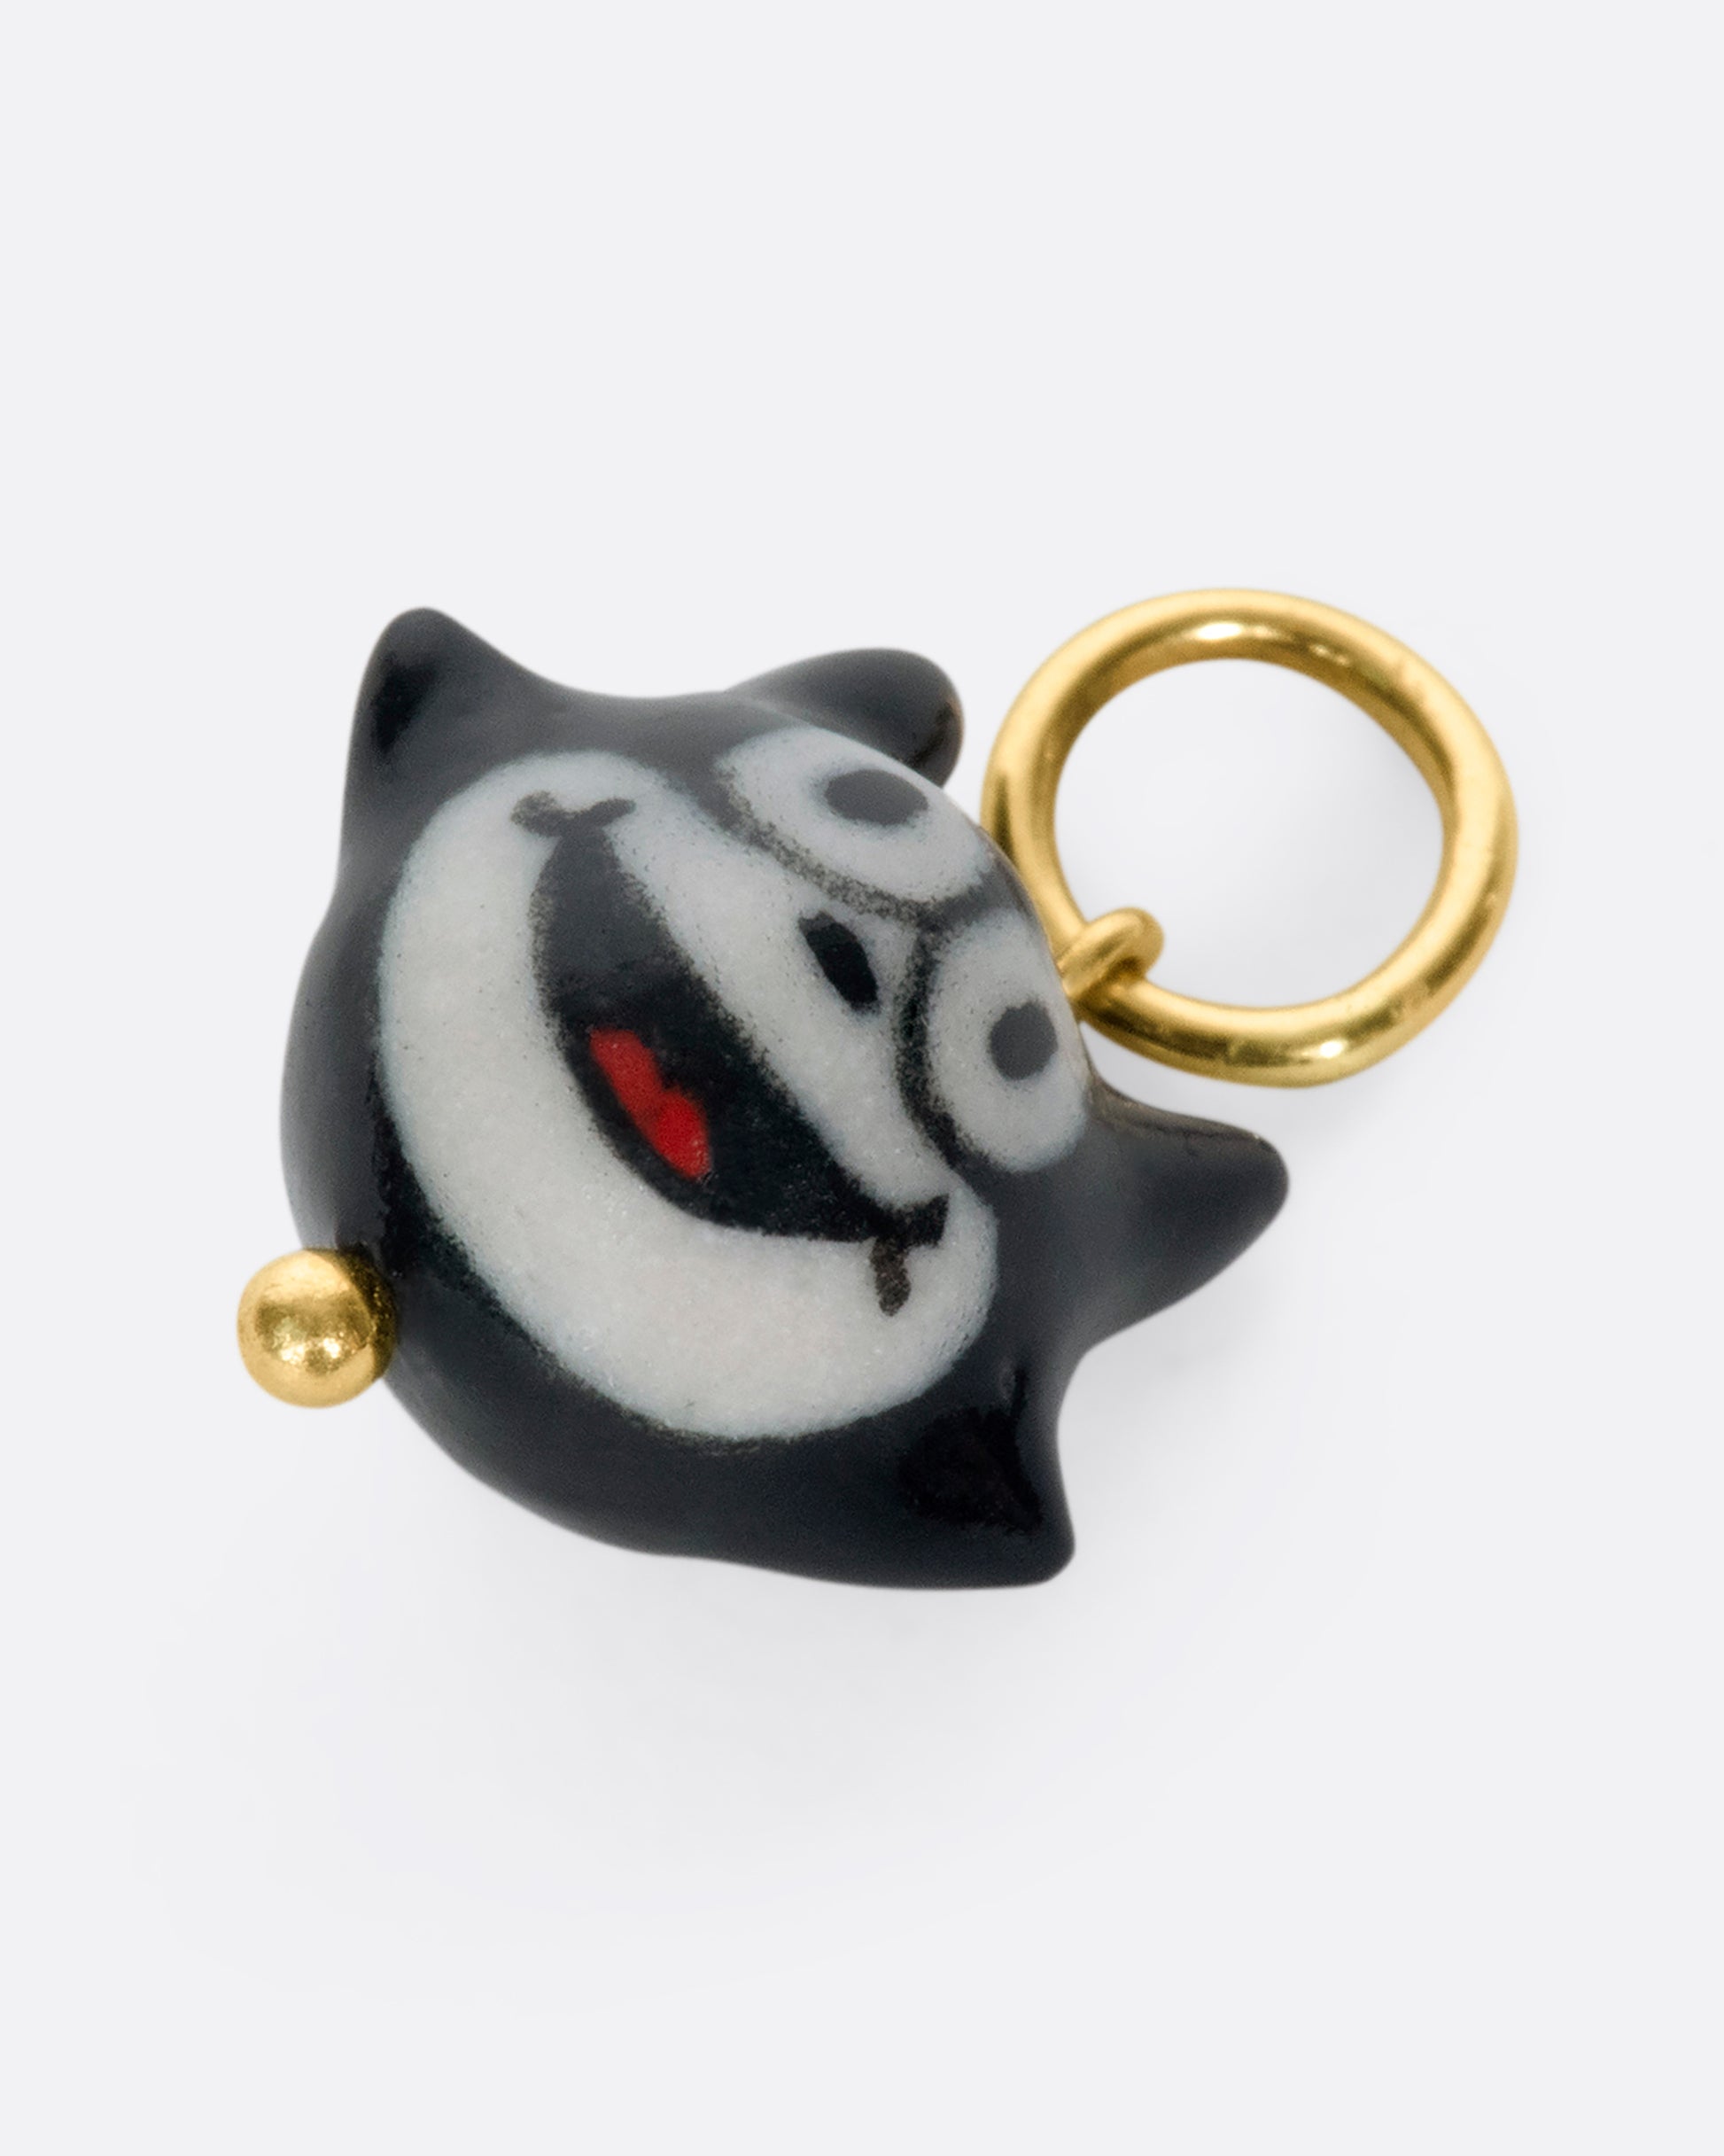 A handmade and painted porcelain Felix the Cat charm with a 14k gold bail